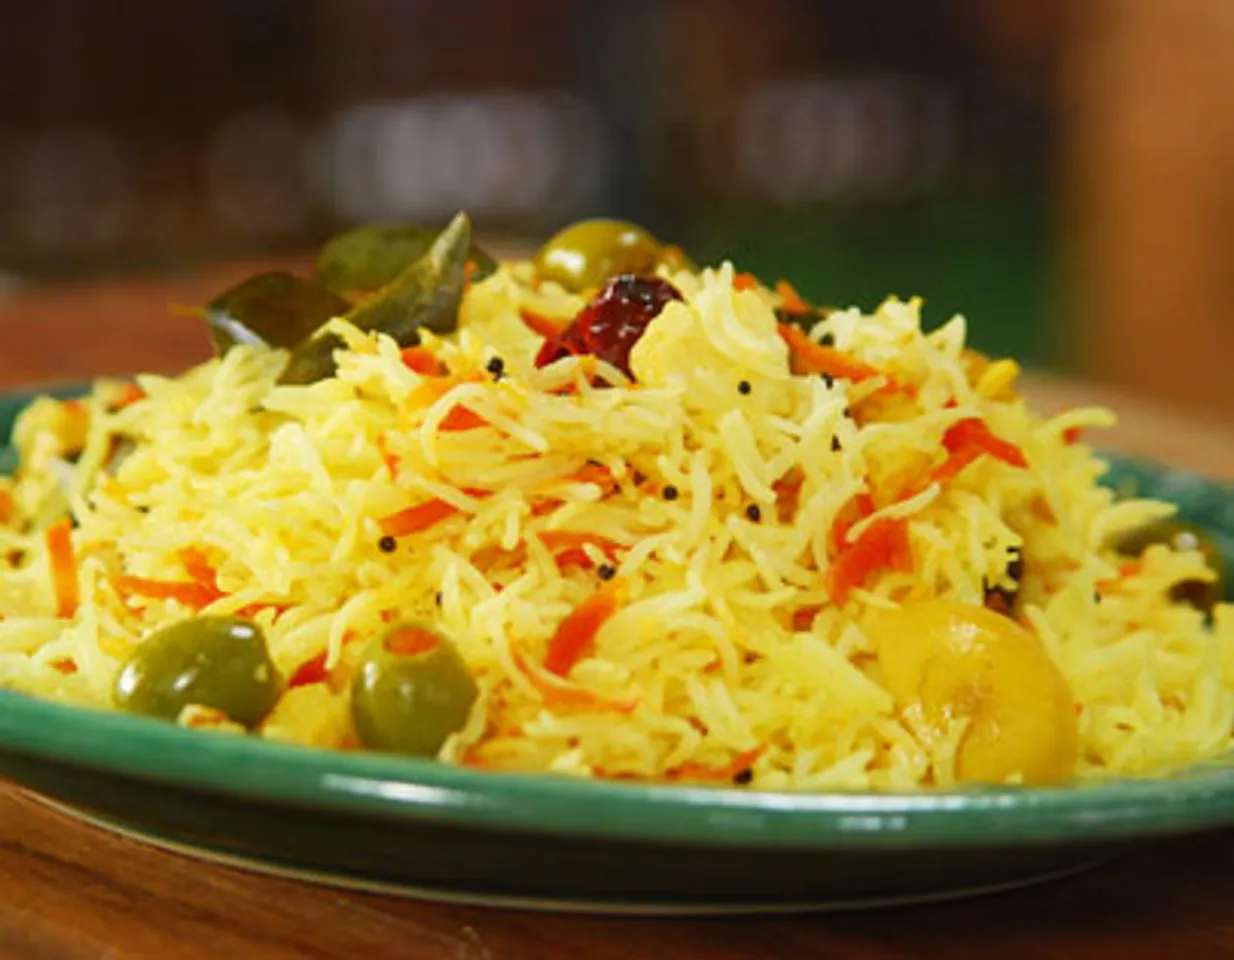 Lemon Rice With Vegetables